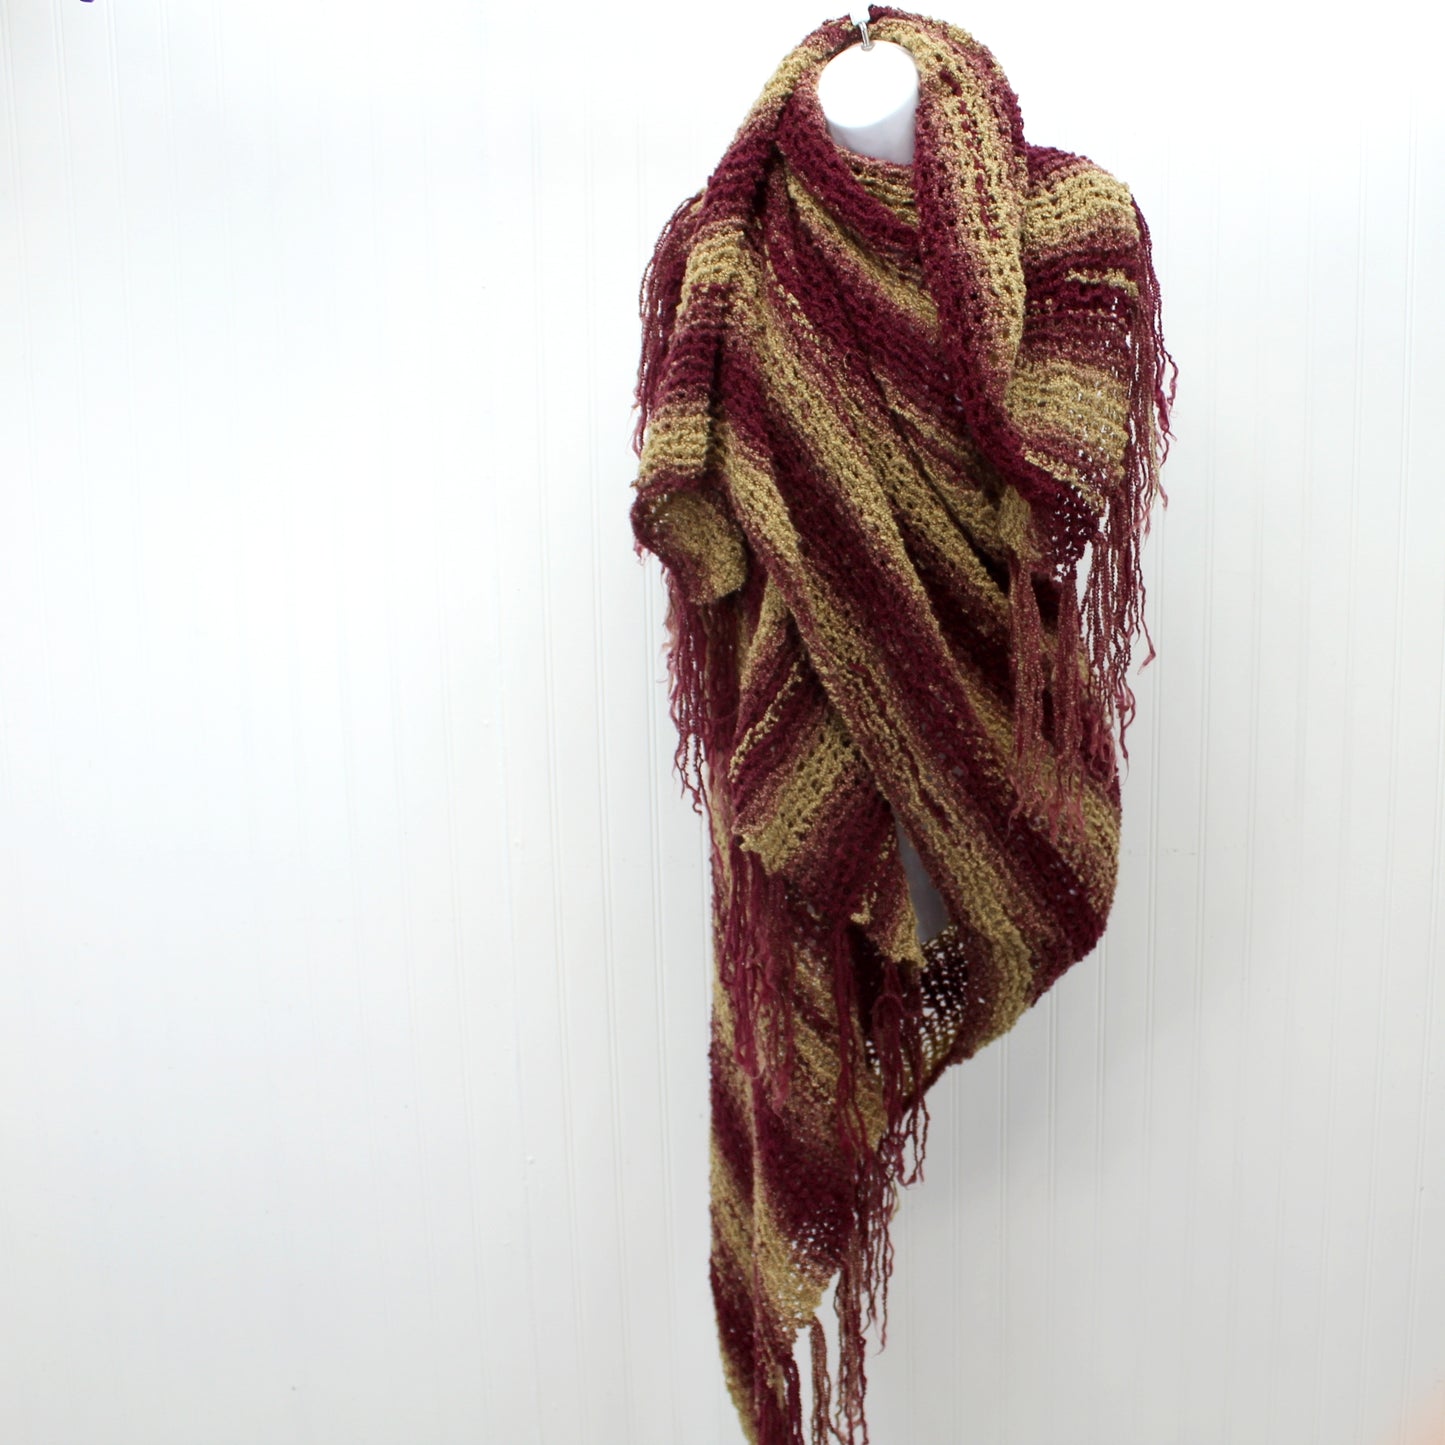 Hand Made Chenille Shawl Scarf Long Lacy Suit Coat Wrap Burgundy Camel Fringe full body or torso wrap